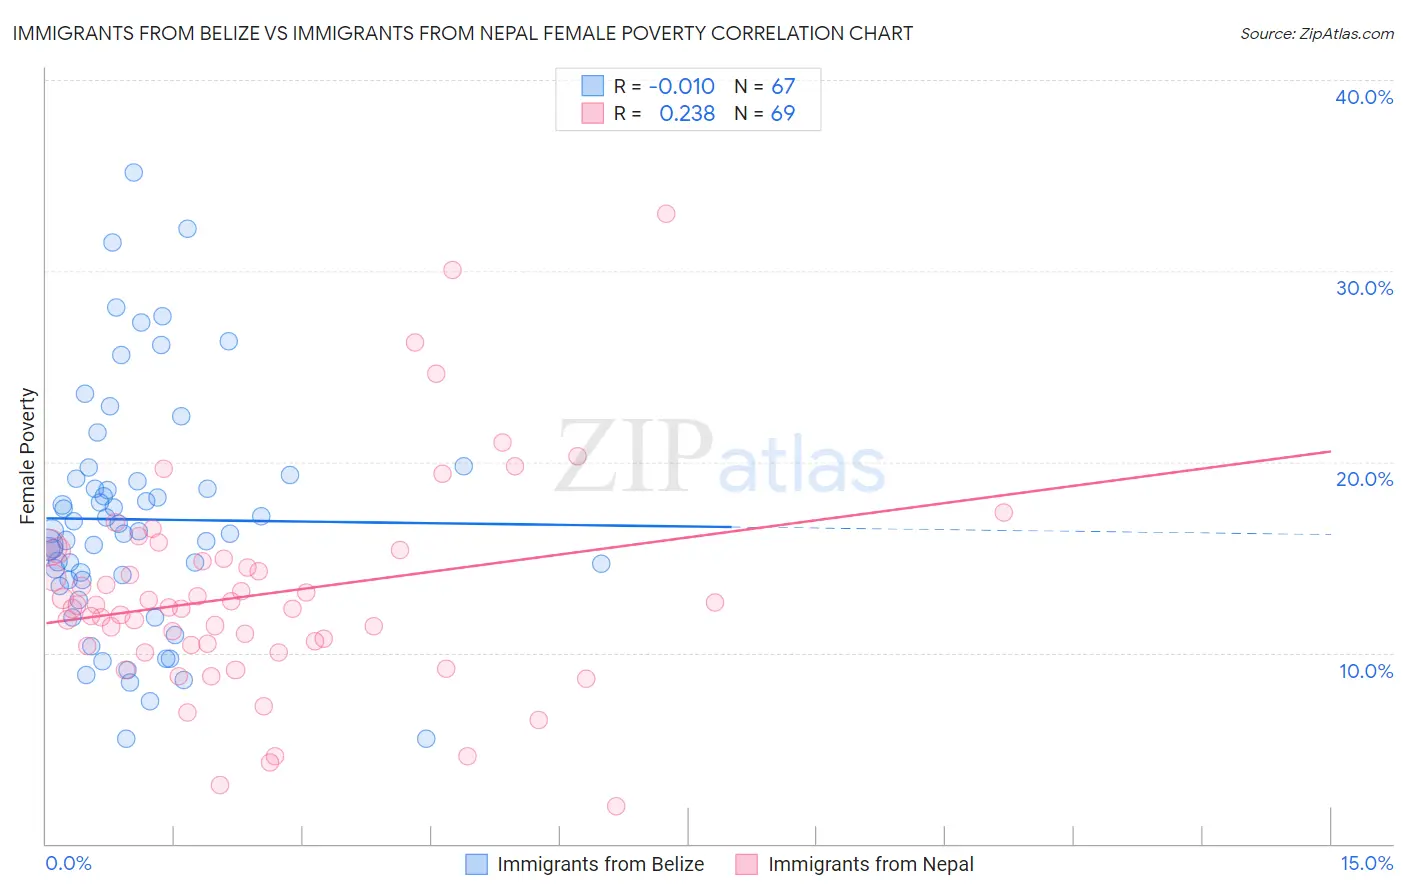 Immigrants from Belize vs Immigrants from Nepal Female Poverty